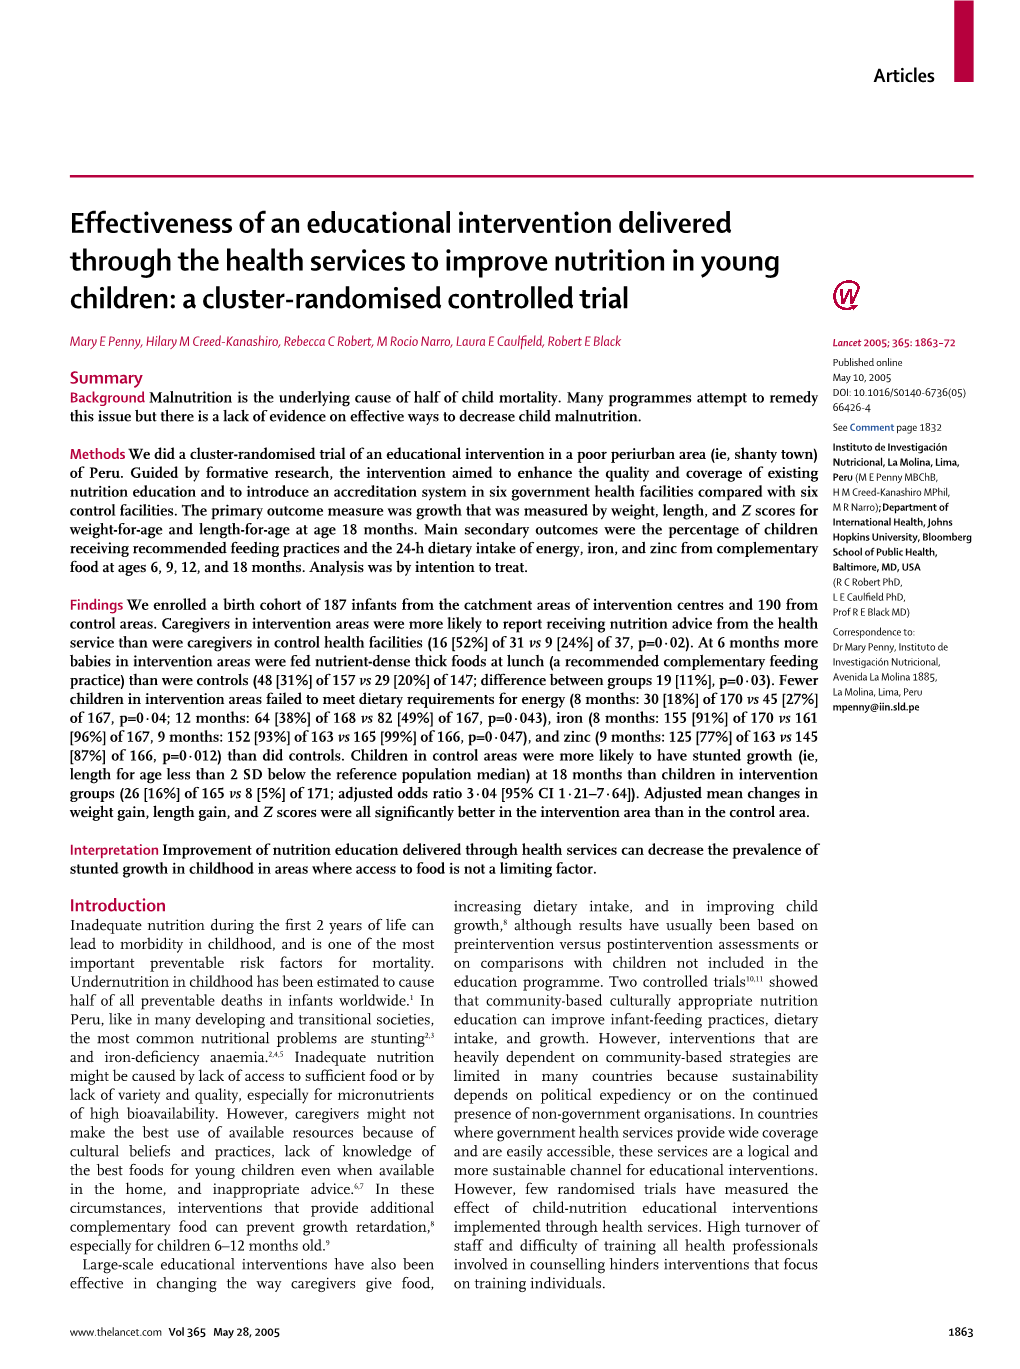 Effectiveness of an Educational Intervention Delivered Through the Health Services to Improve Nutrition in Young Children: a Cluster-Randomised Controlled Trial